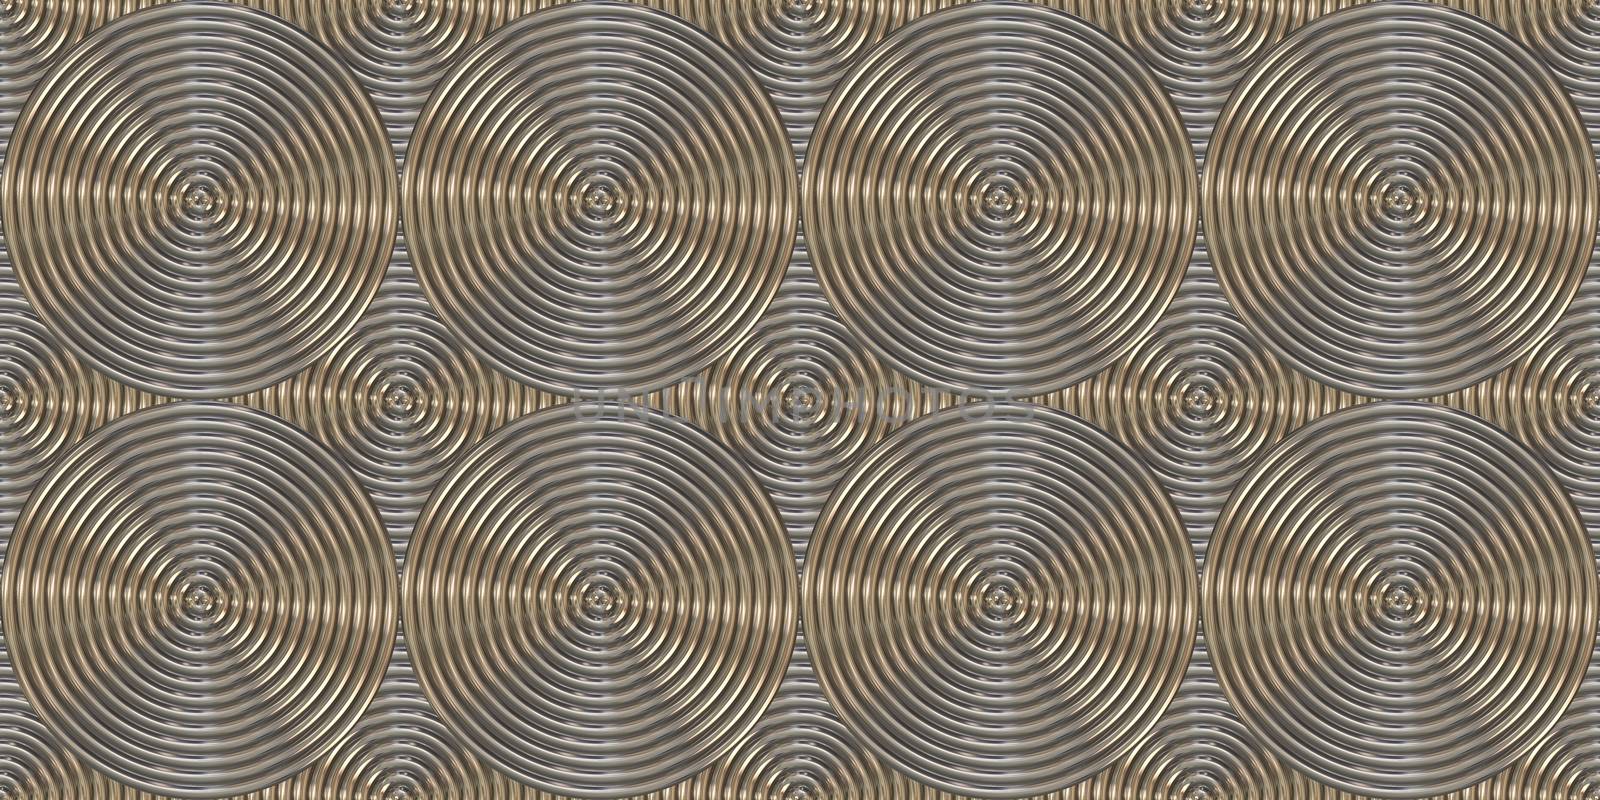 Vintage rings background. Gold silver art deco seamless texture. Metal circles pattern. by sanches812